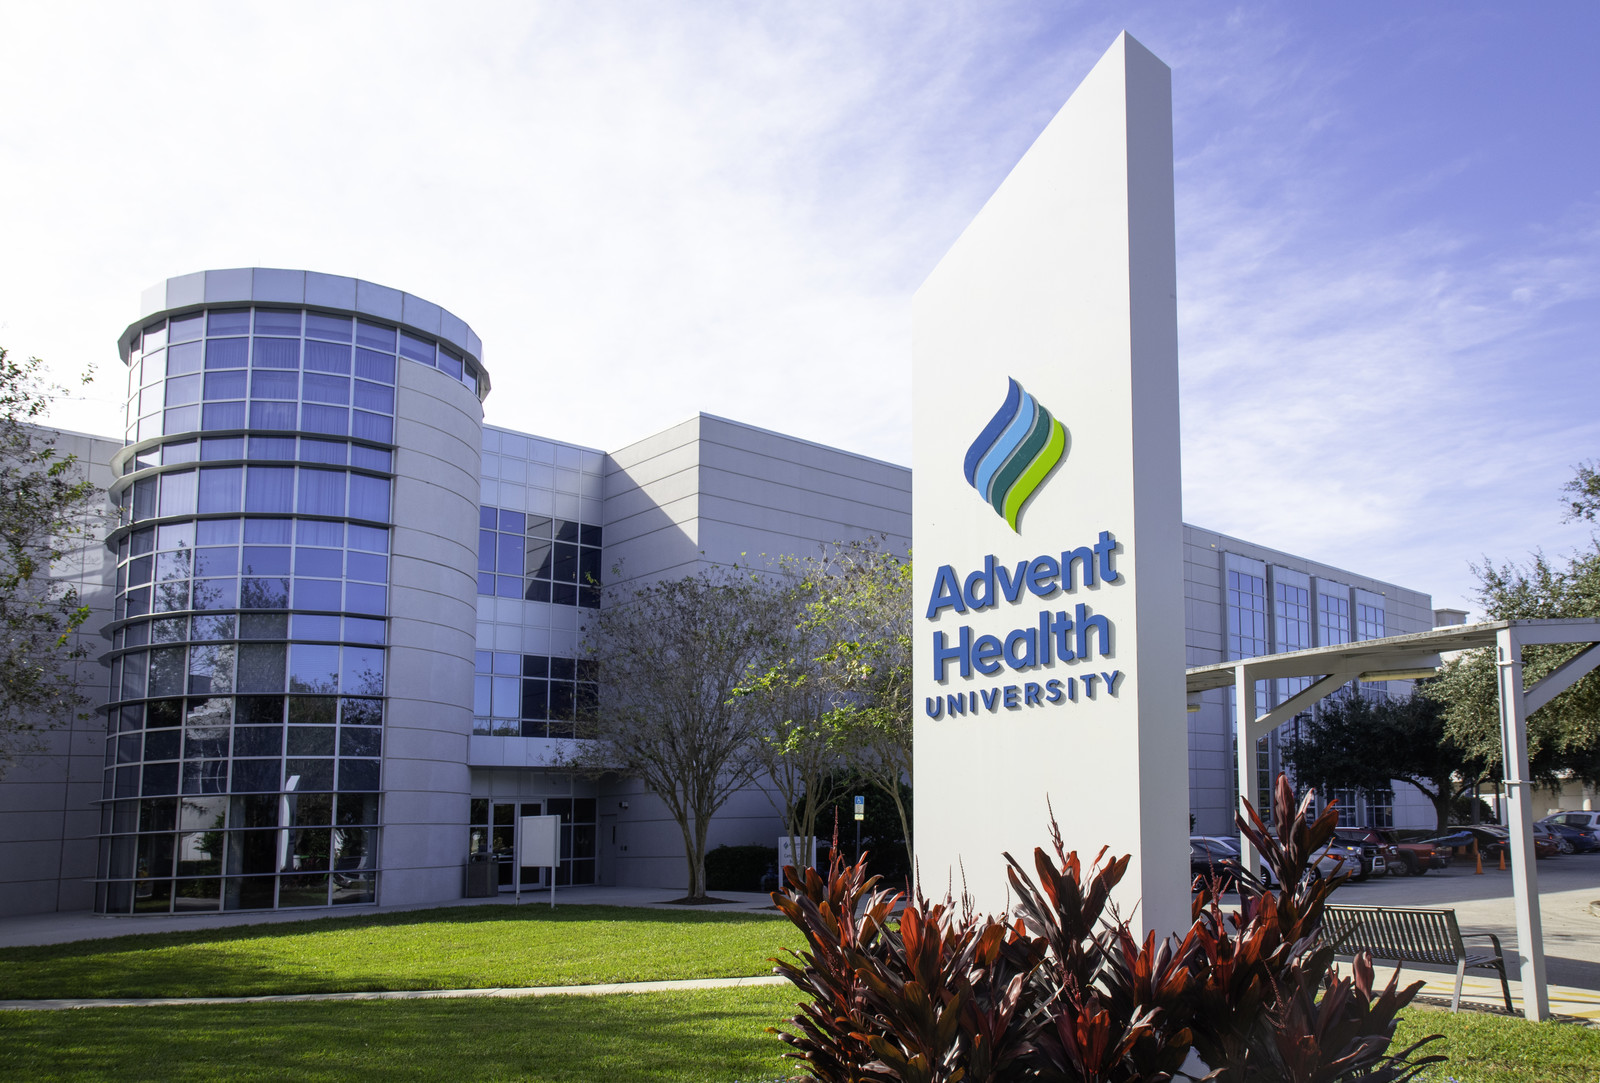 adventist university of health sciences occupational therapy prerequisites